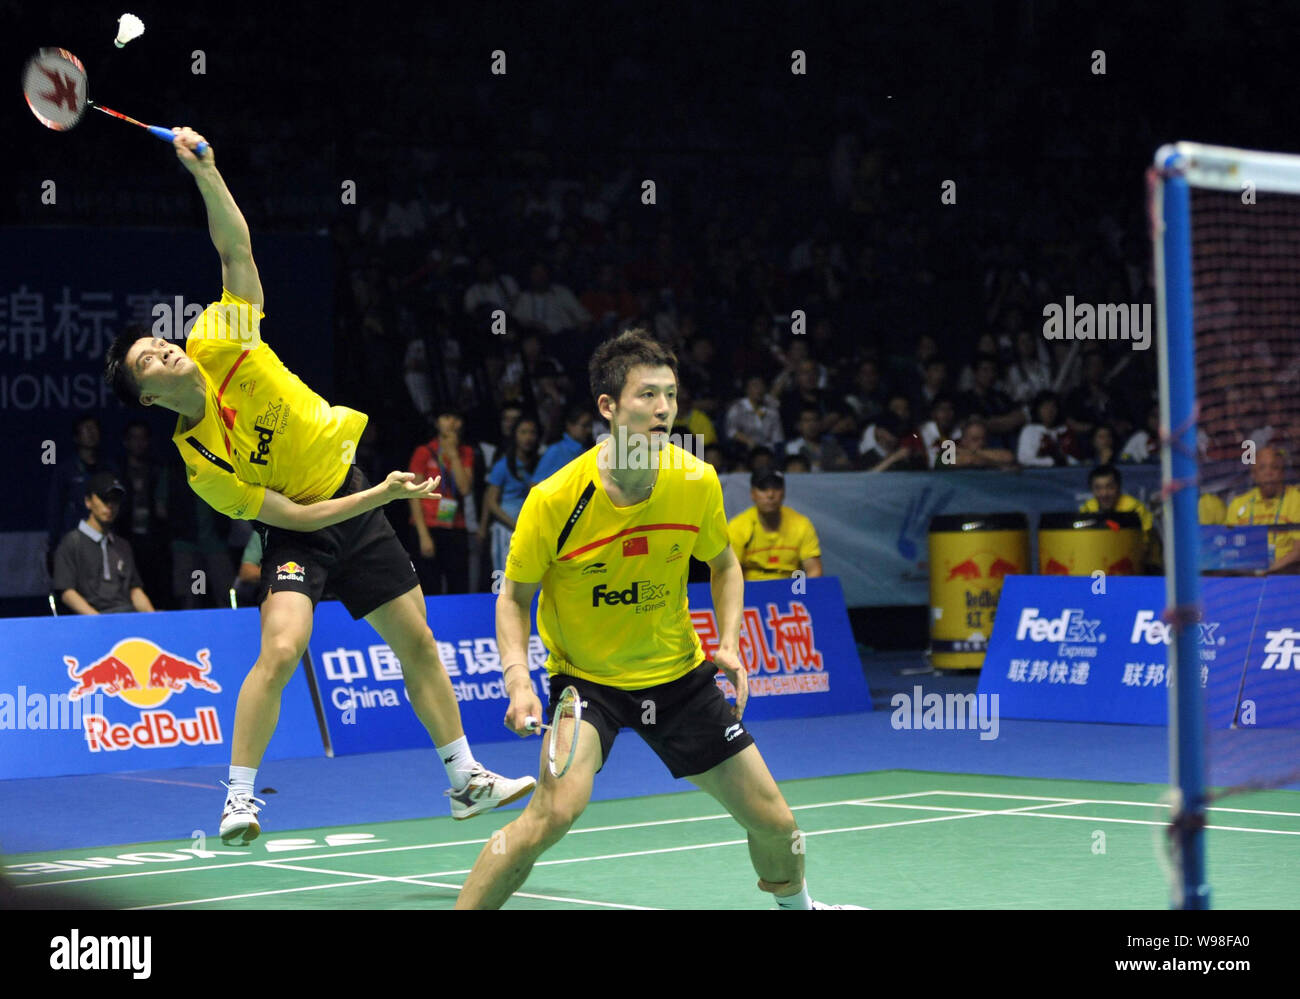 Cai Yun (L) of China, with his partner Fu Haifeng (R), returns a shot against Carsten Mogensen and Jonas Rasmussen of Denmark during the finals of the Stock Photo